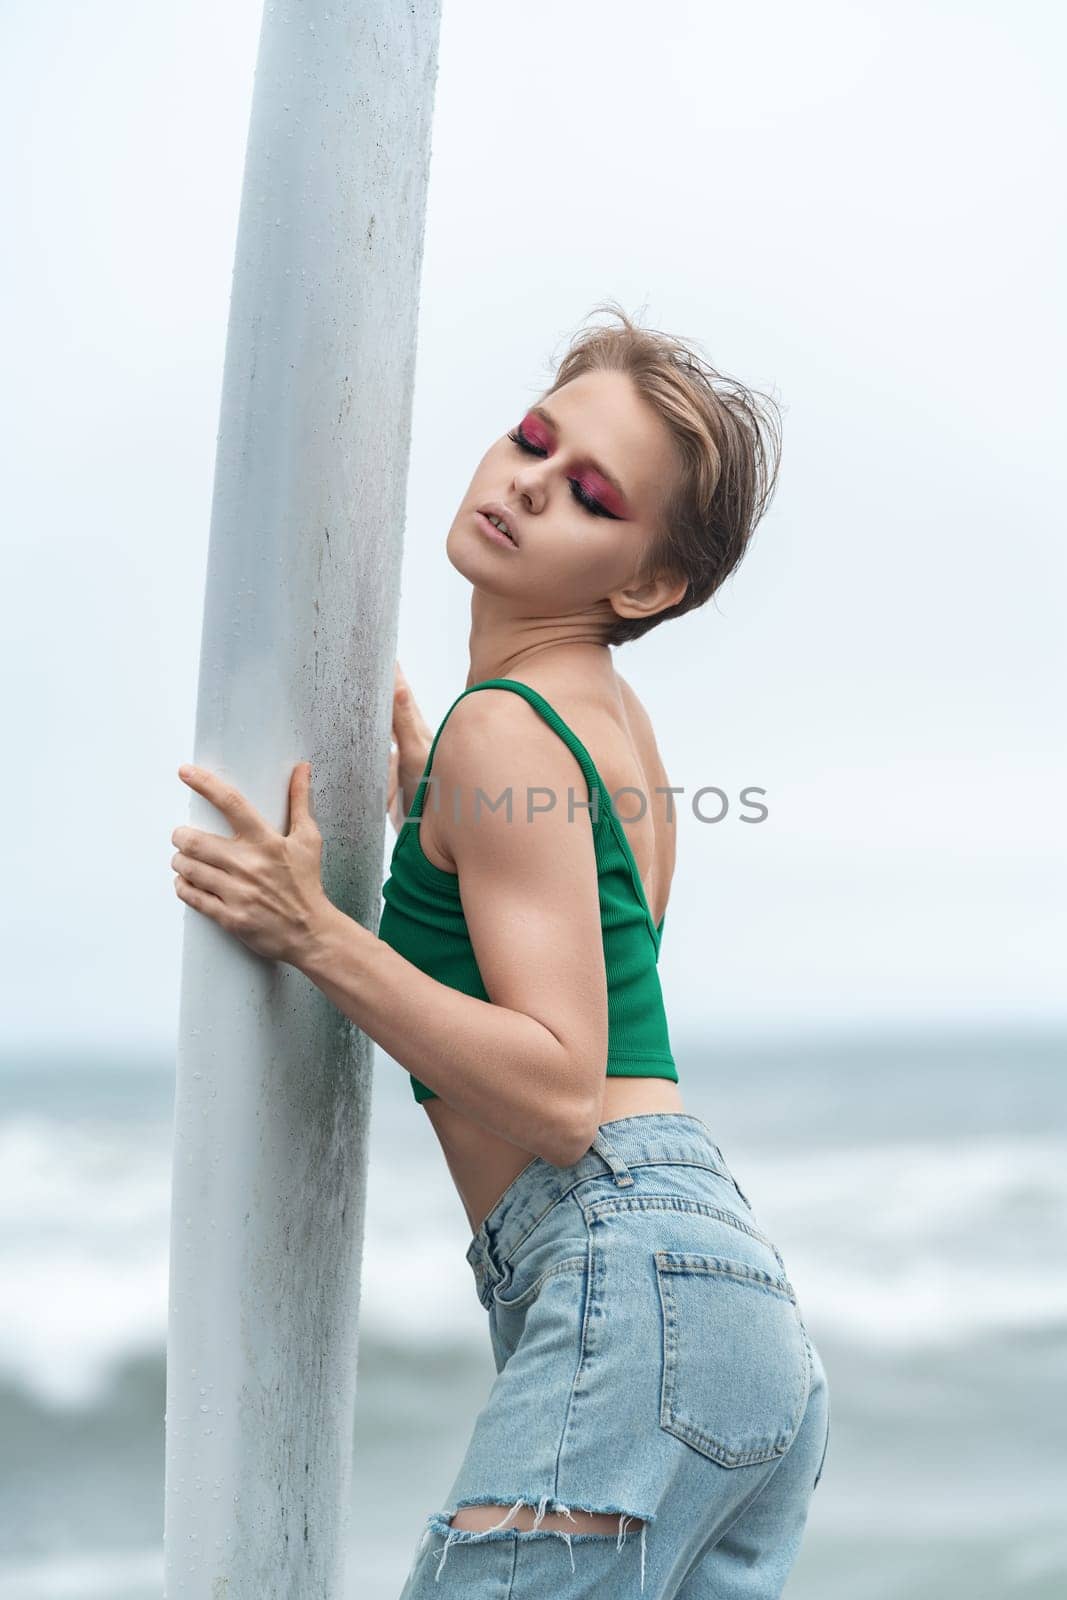 Portrait of sensual beautiful woman with closed eyes holding white surfboard with both hands, posing sexy. Fashion model with short hair and bright makeup wearing casual clothing - top and blue jeans